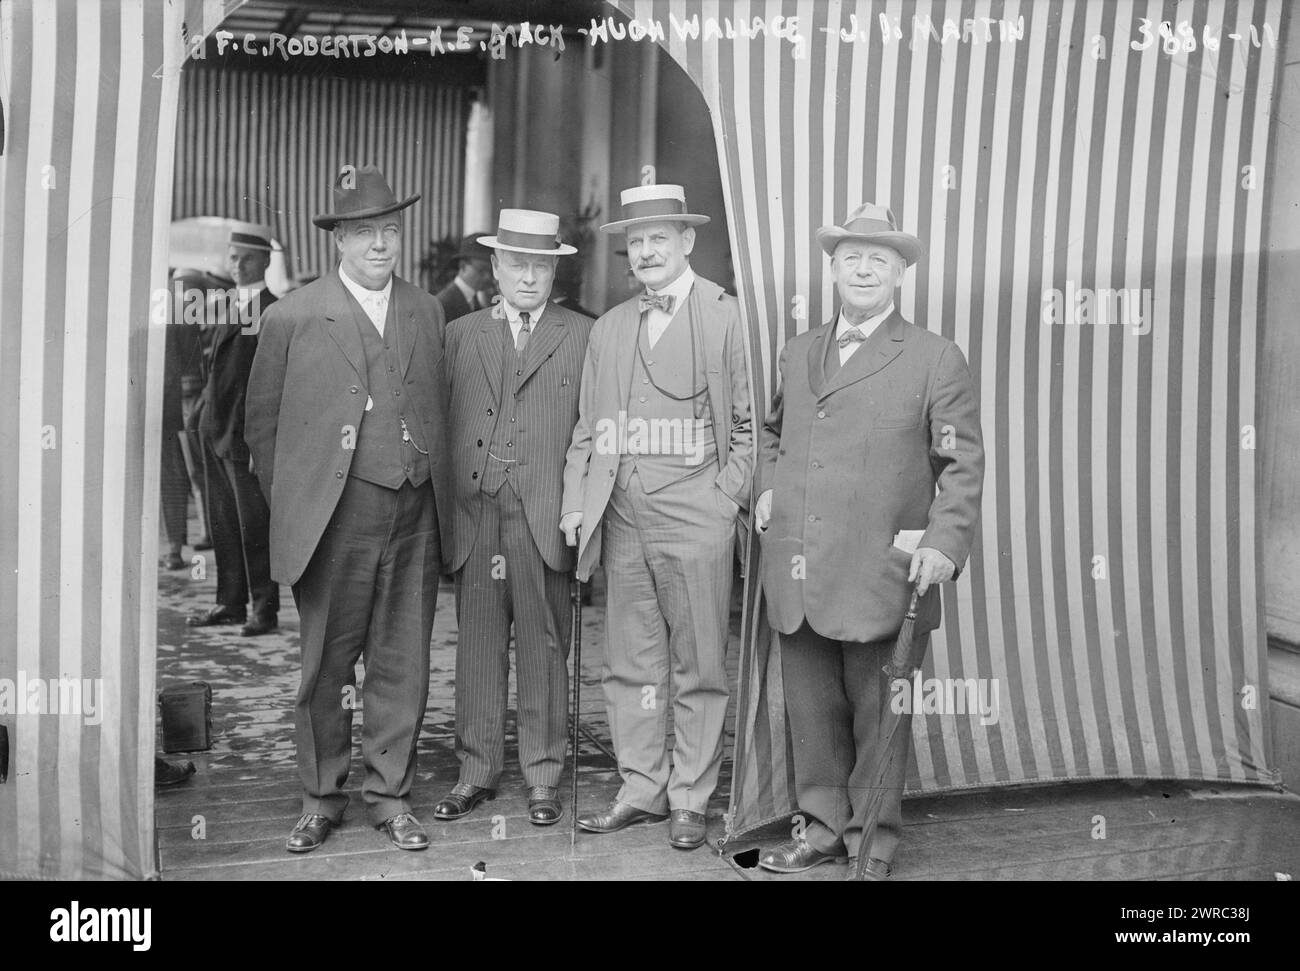 F.C. Robertson, H.E. Mack, Hugh Wallace, J.I. Martin, Photograph shows from left, Frederick C. Robertson, Norman Edward Mack, Hugh Campbell Wallace and Colonel John I. Martin at the 1916 Democratic National Convention held in St. Louis, Missouri from June 14-16., 1916 June, Glass negatives, 1 negative: glass Stock Photo